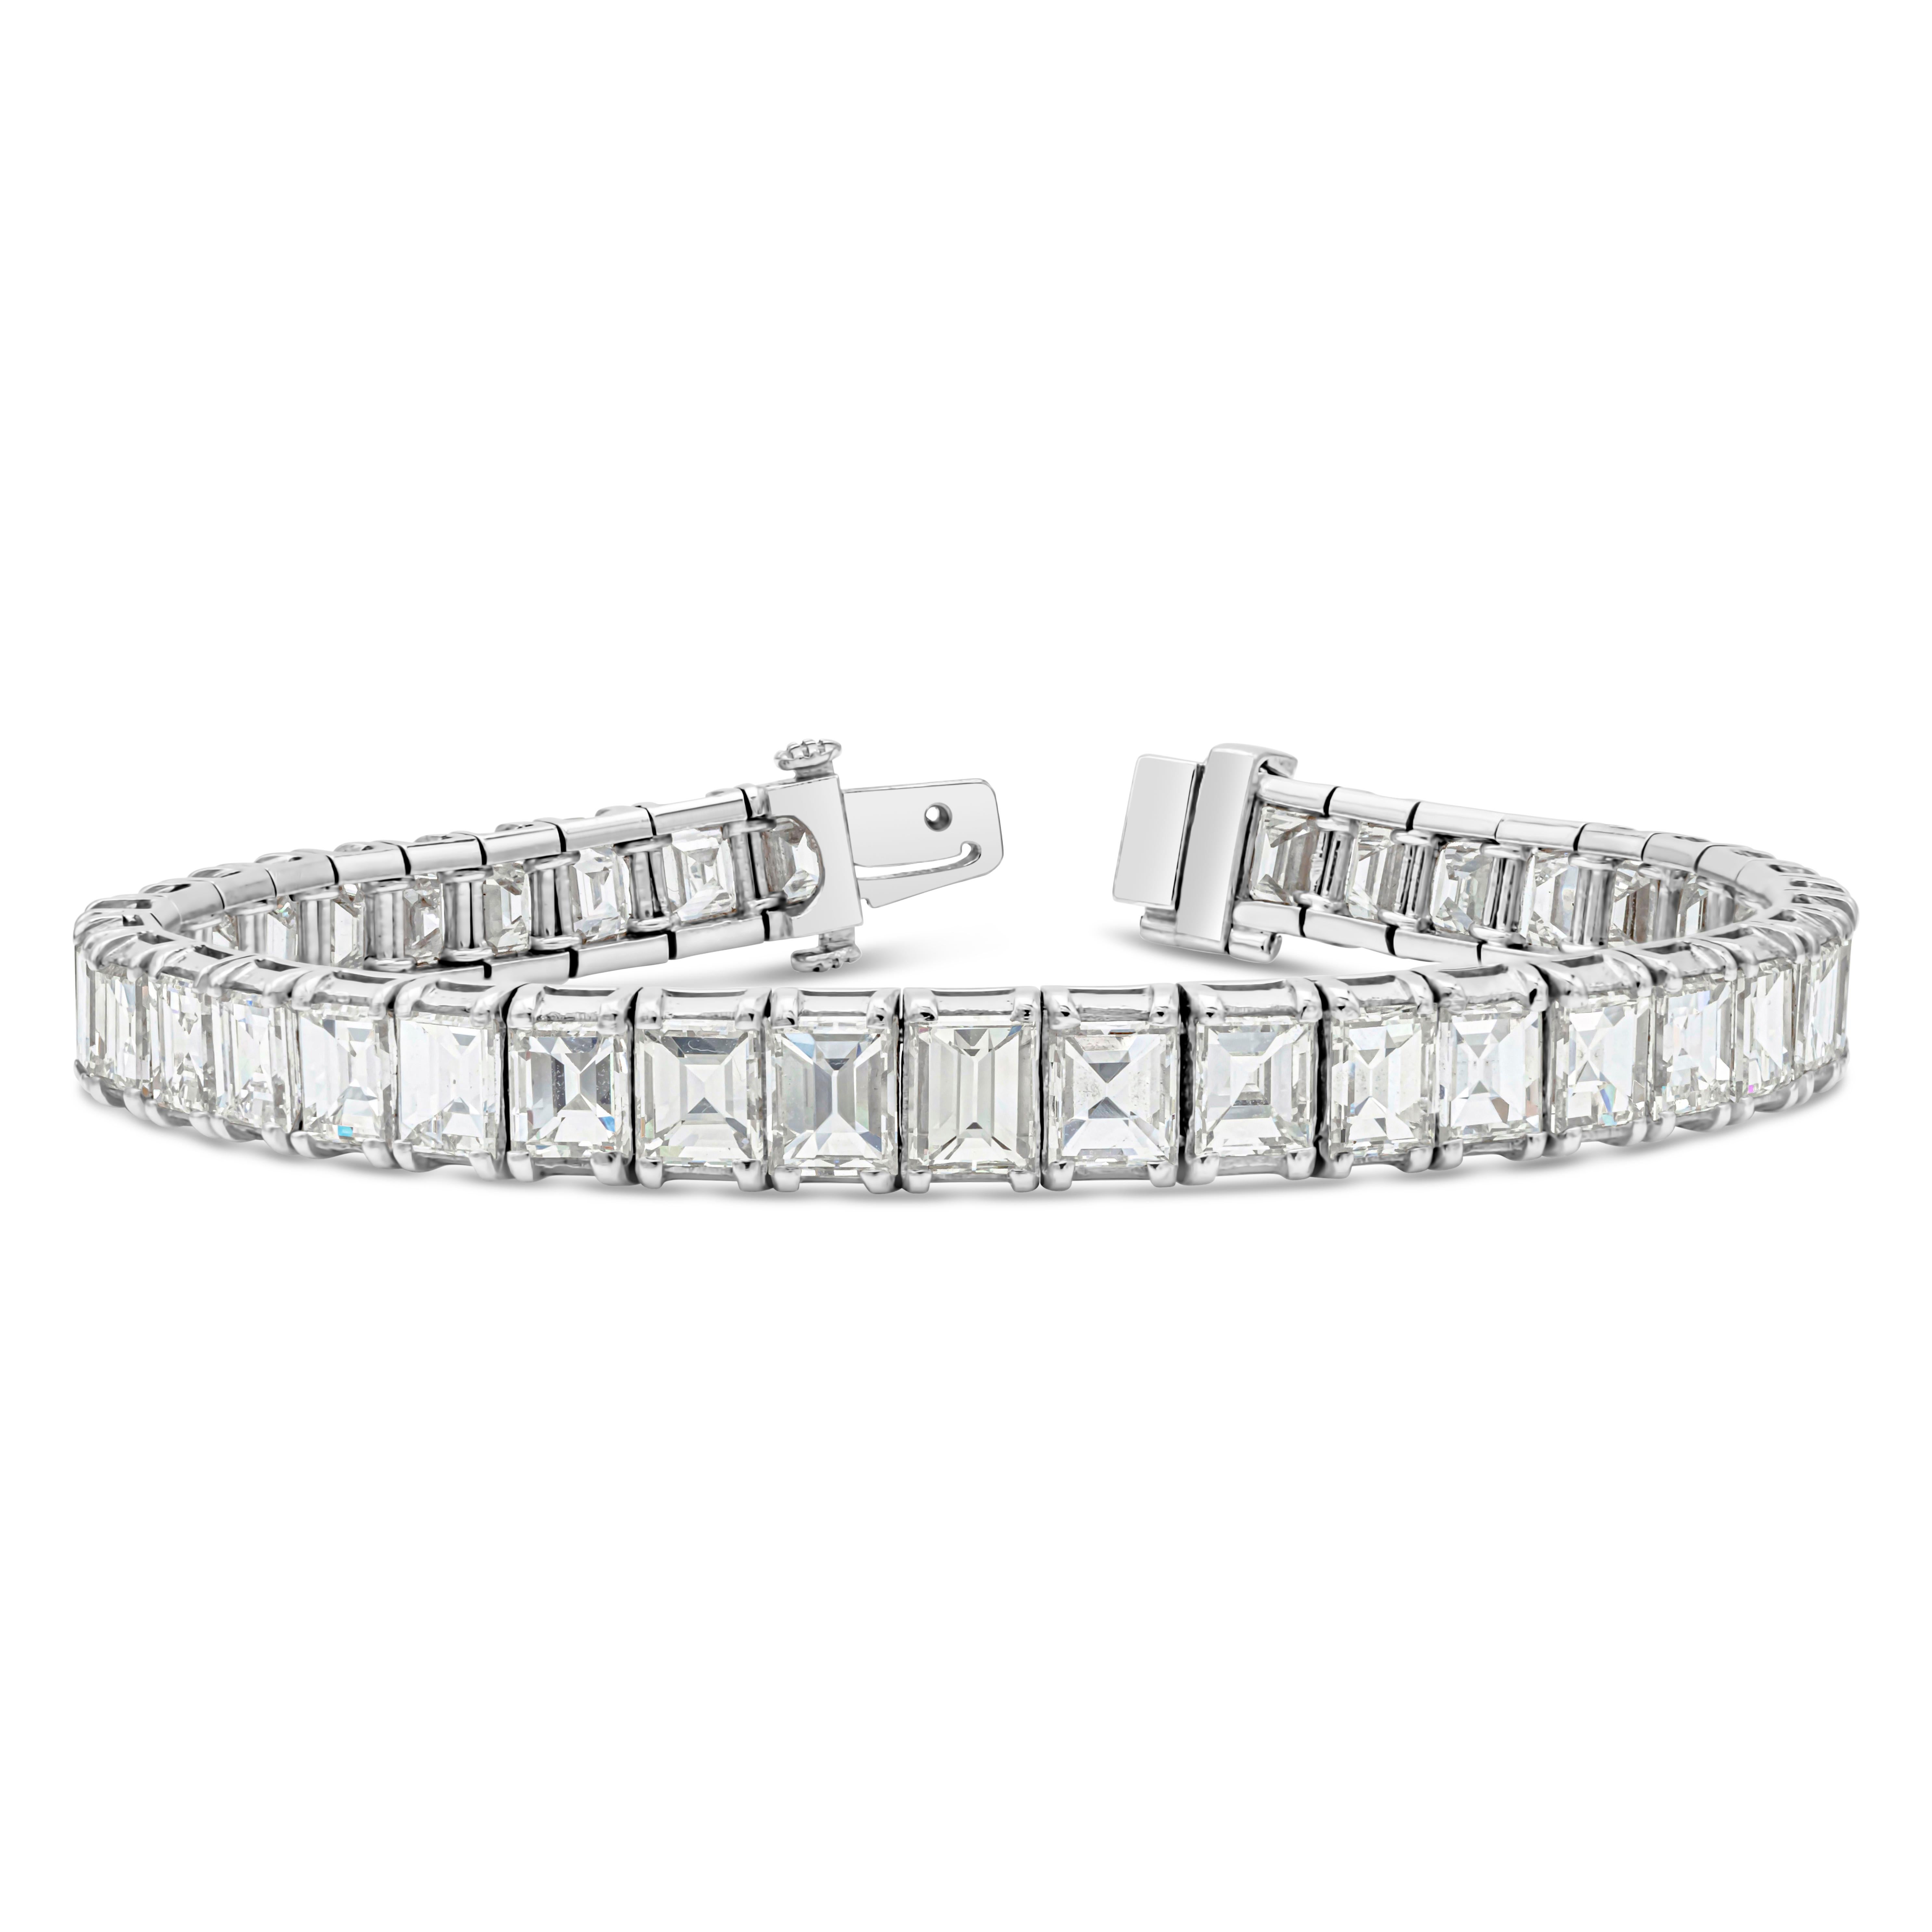 A beautiful vintage high jewelry tennis bracelet showcasing a row of baguette diamonds set in a polished platinum mounting. The diamonds are beautiful qualities; G-I color, VVS-VS clarity. 7 inch length hand made jewelry piece.

Roman Malakov is a